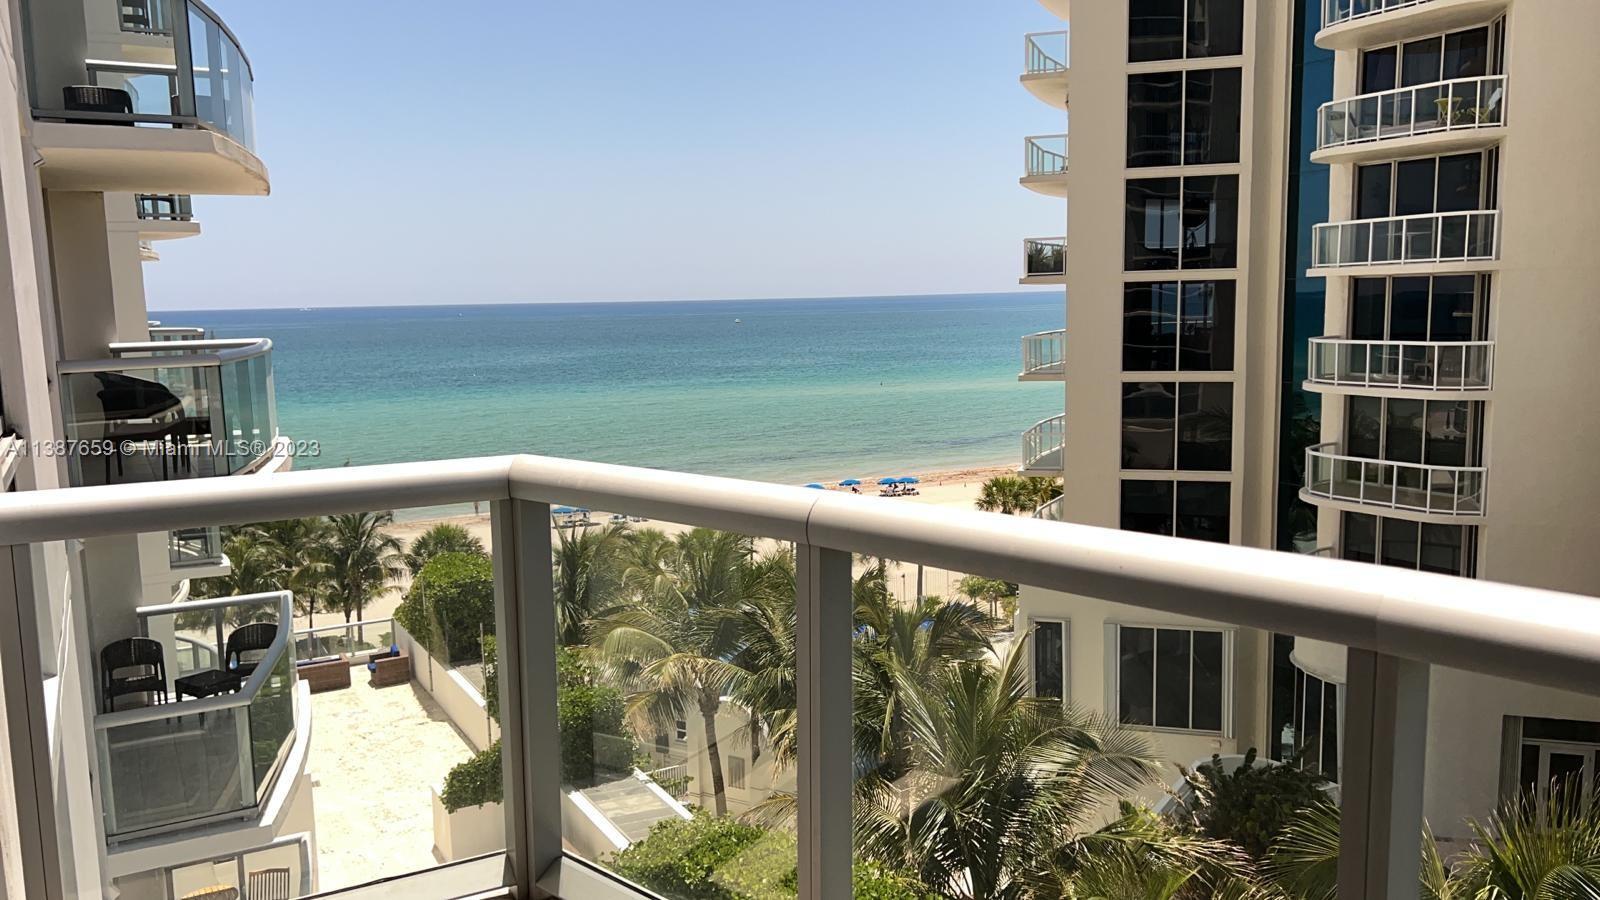 Amazing ocean view 688 sq ft , Unit comes fully furnished including breakfast bar , dishwasher ,wash